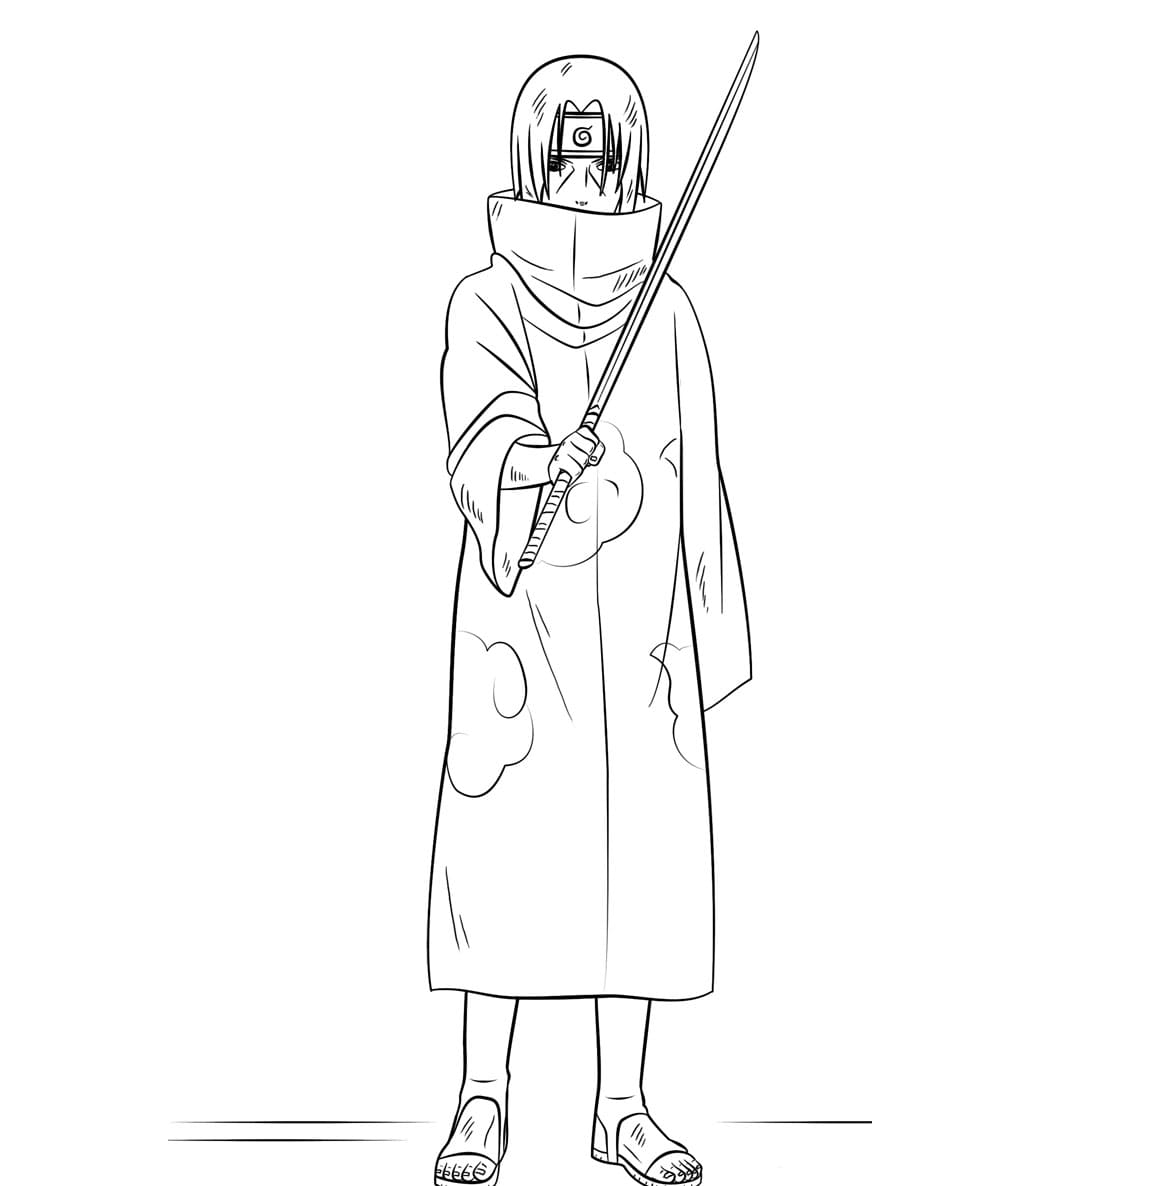 Itachi Holding Sword coloring page